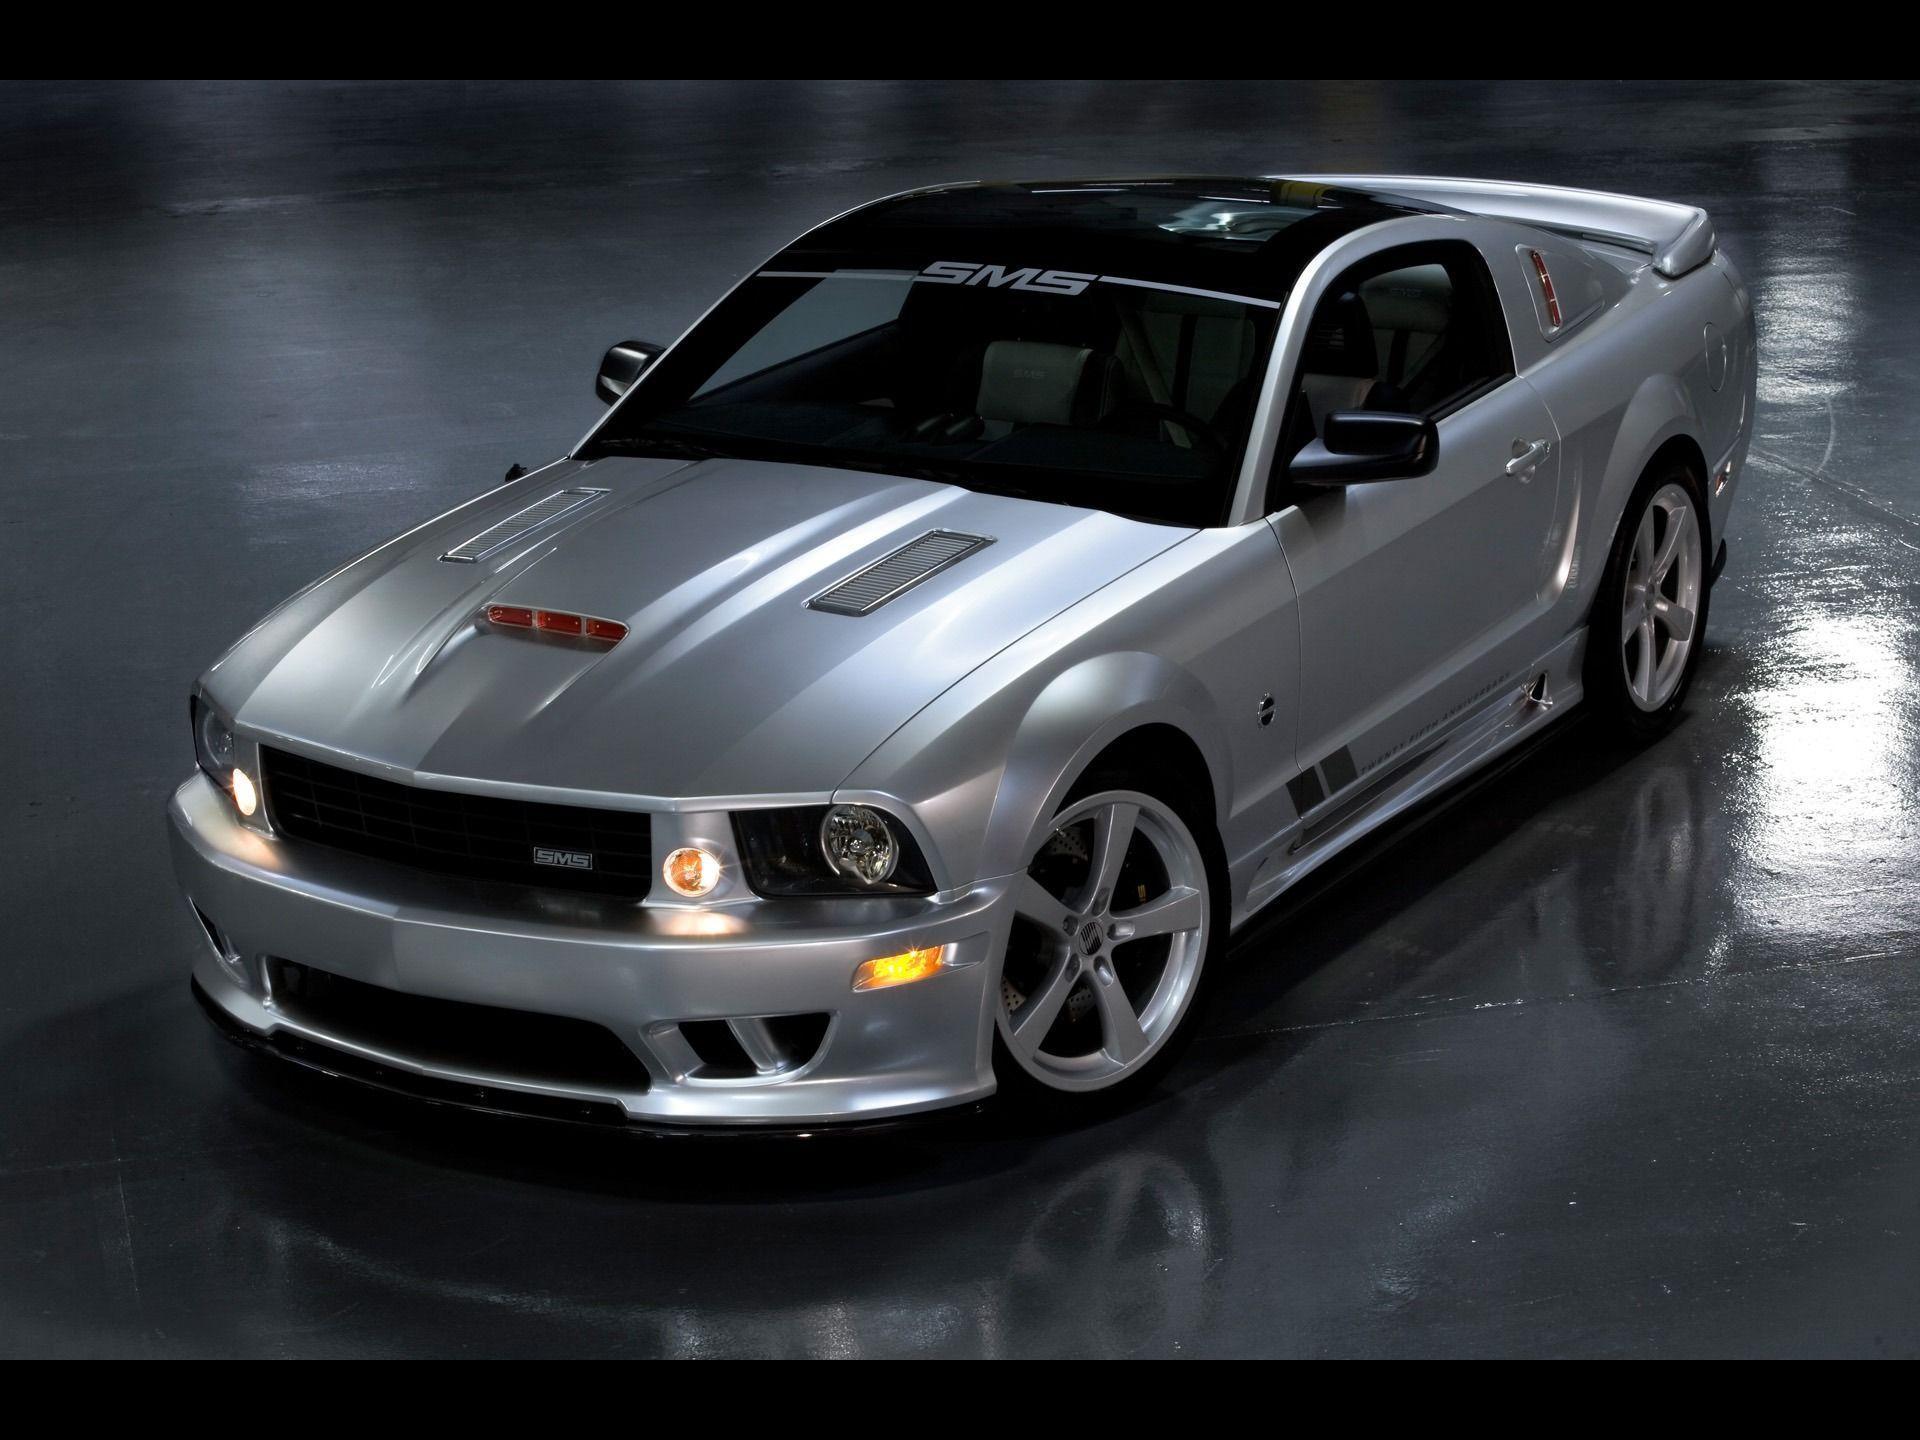 Car wallpaper ford mustang wallpaper for free download about